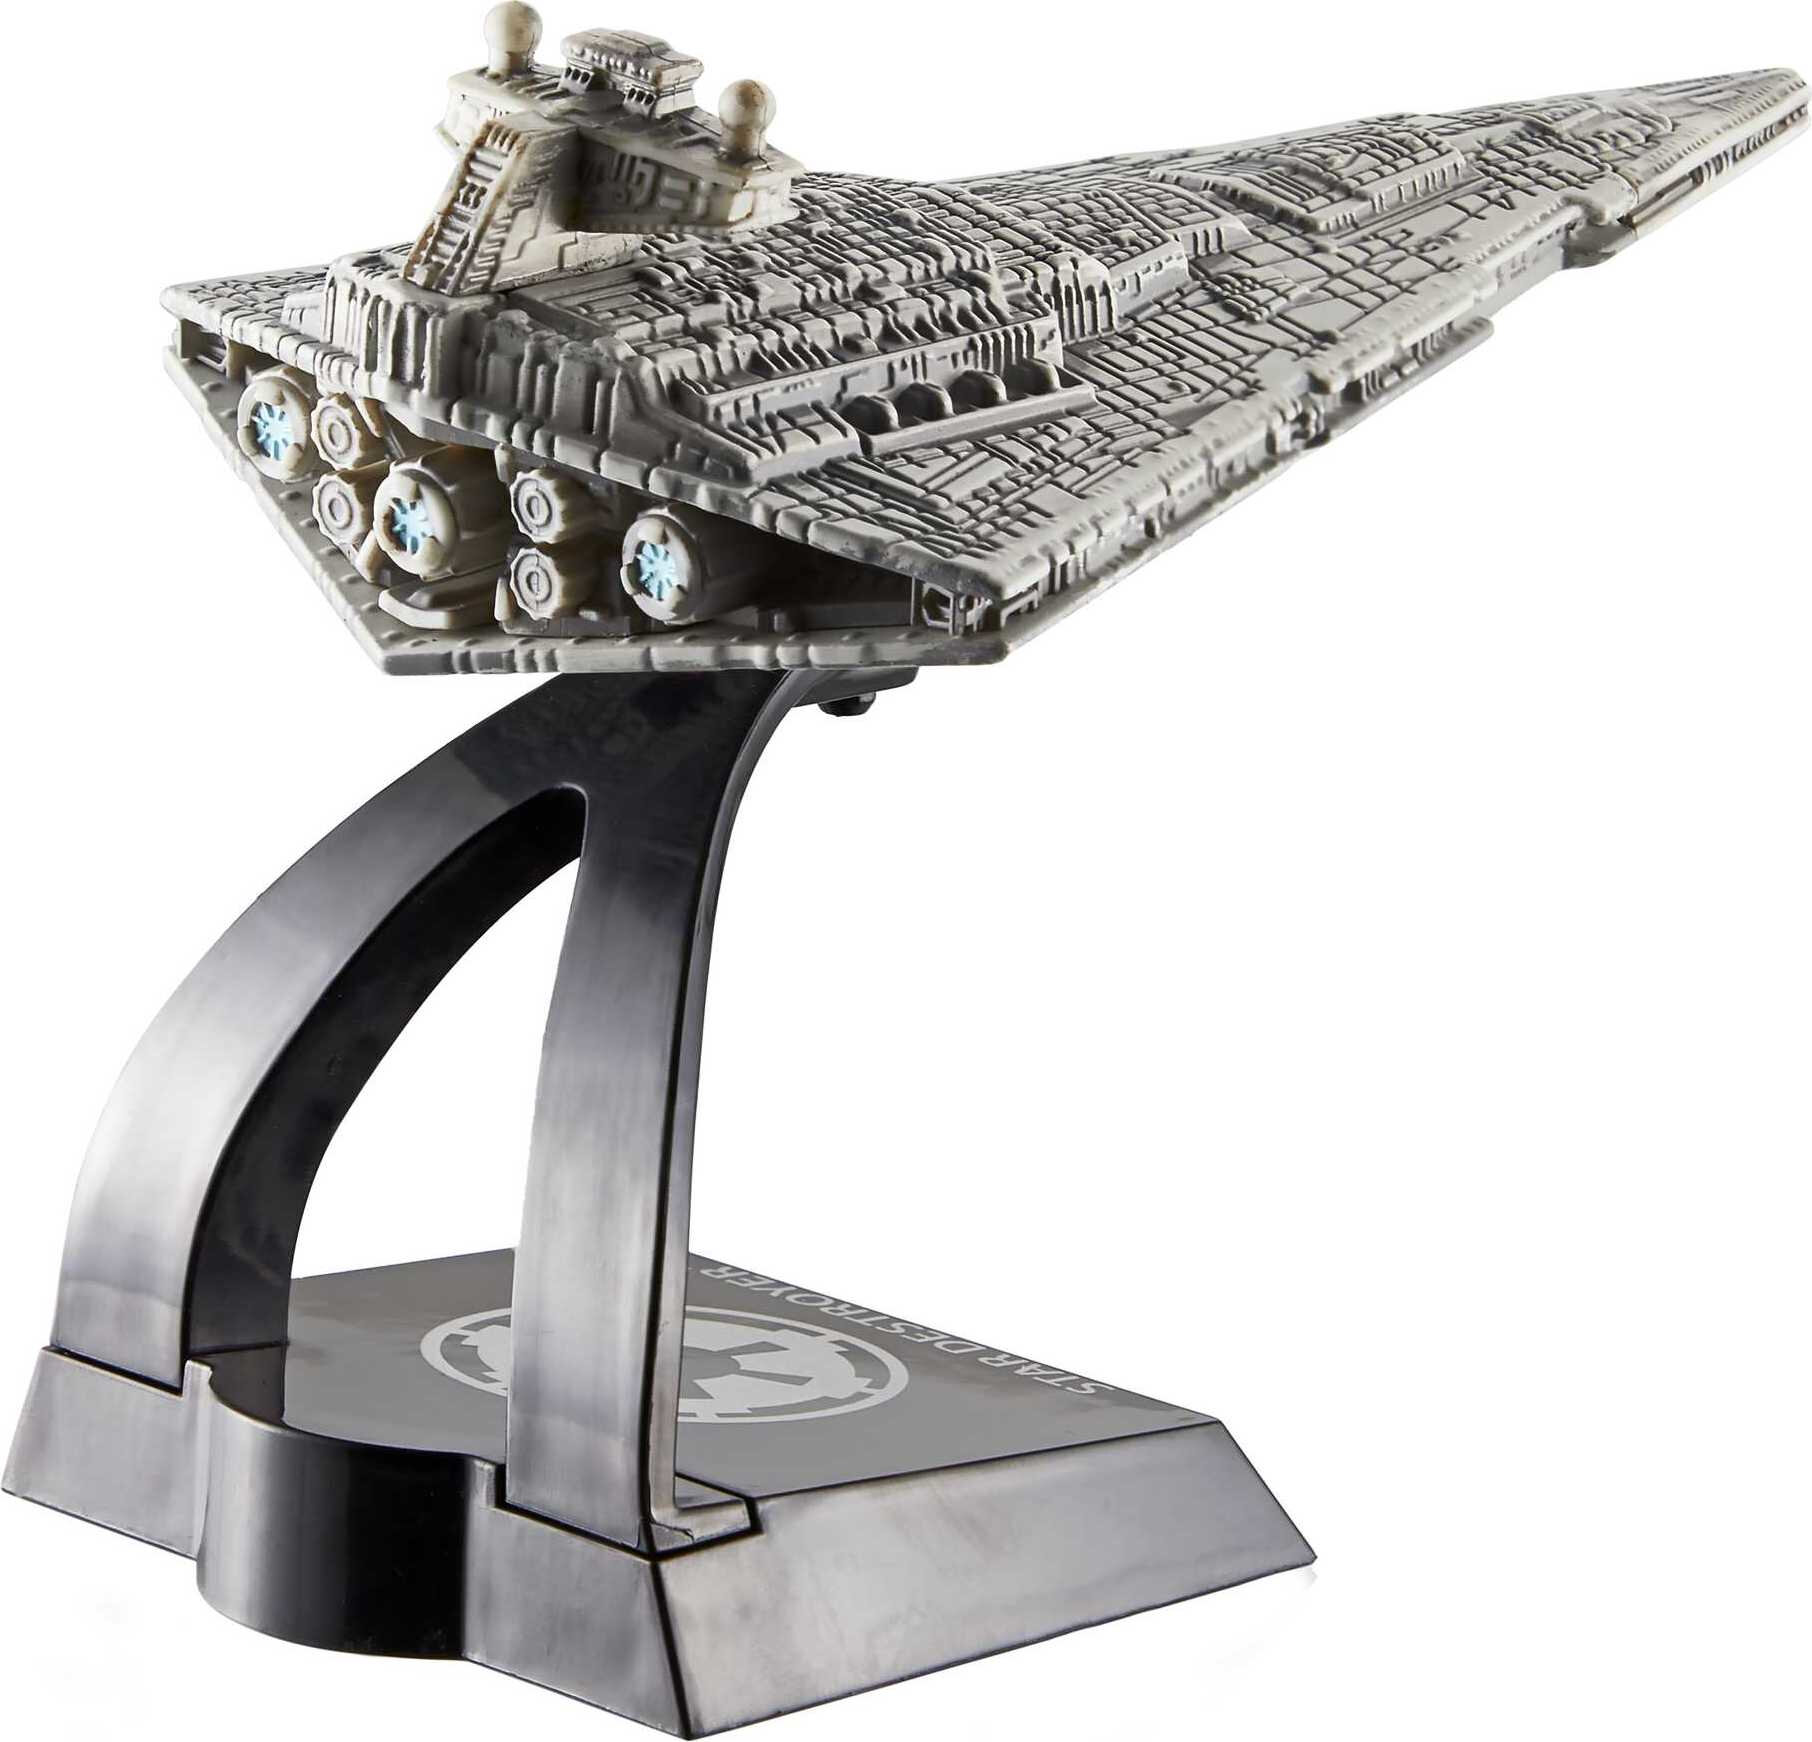 Hot Wheels Star Wars Starships Select, Premium Replica, Gift For Adults Collectors - image 4 of 5